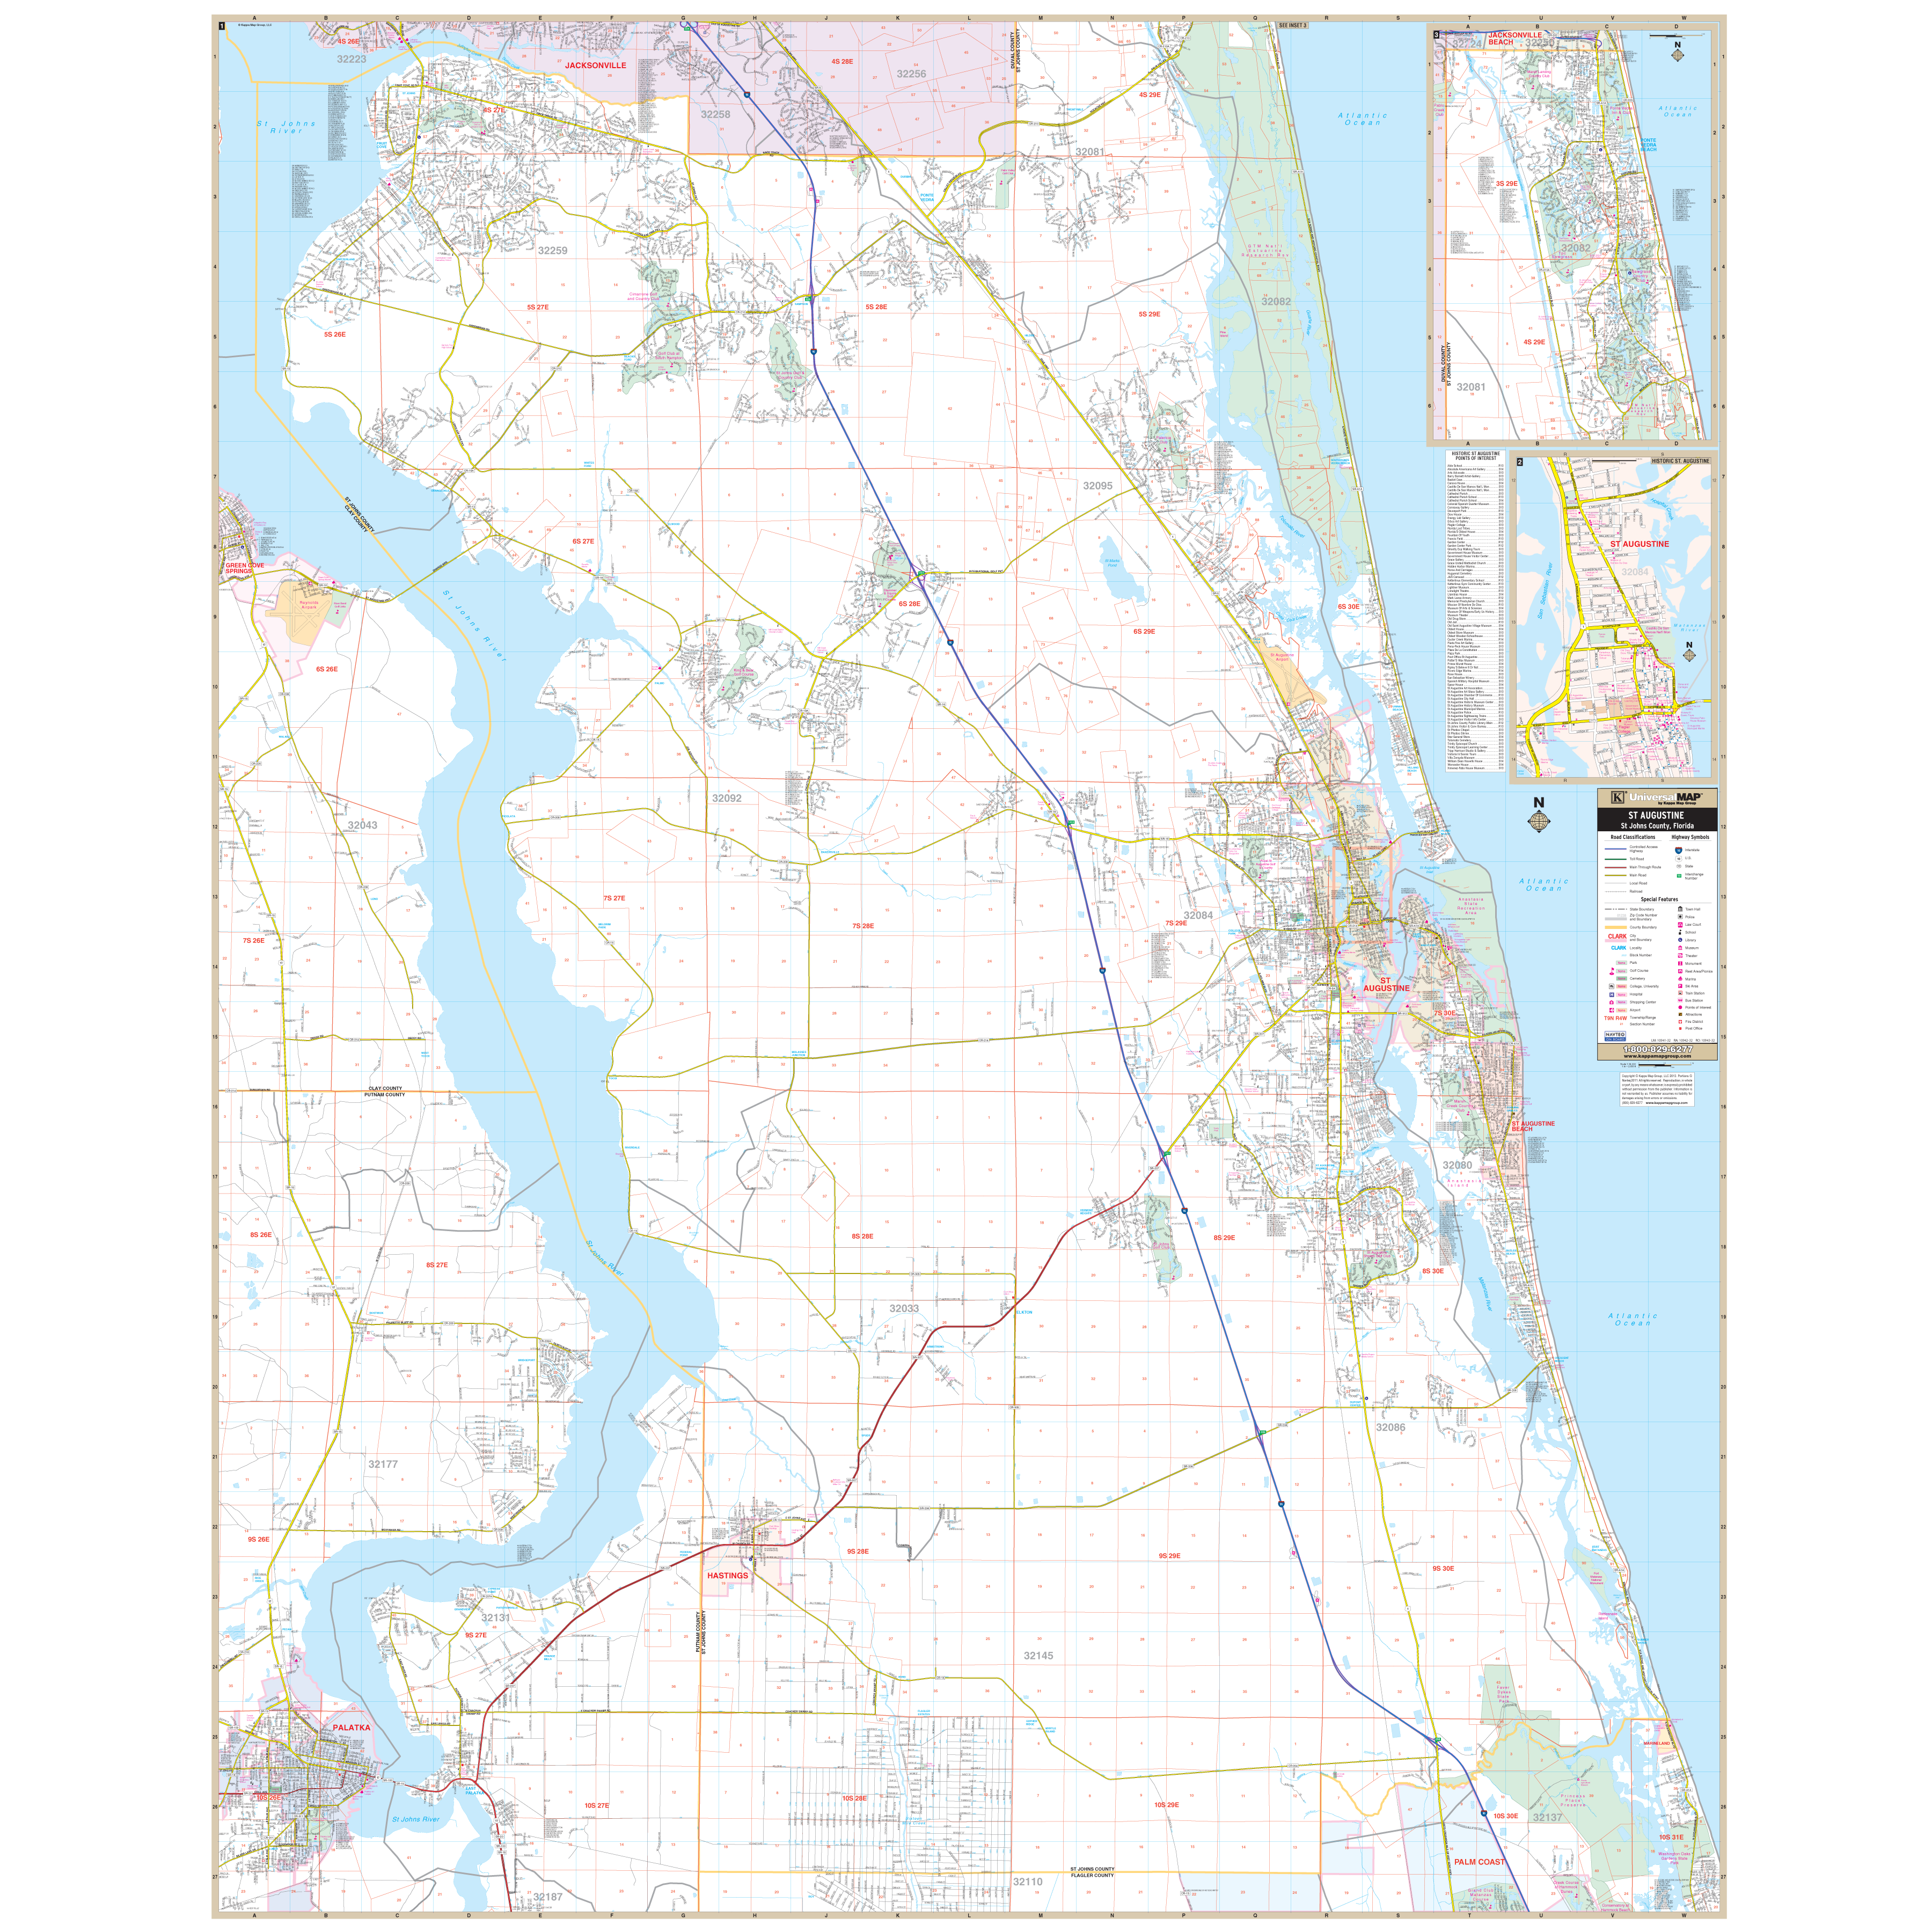 St Augustine, Fl Wall Map - Large Laminated